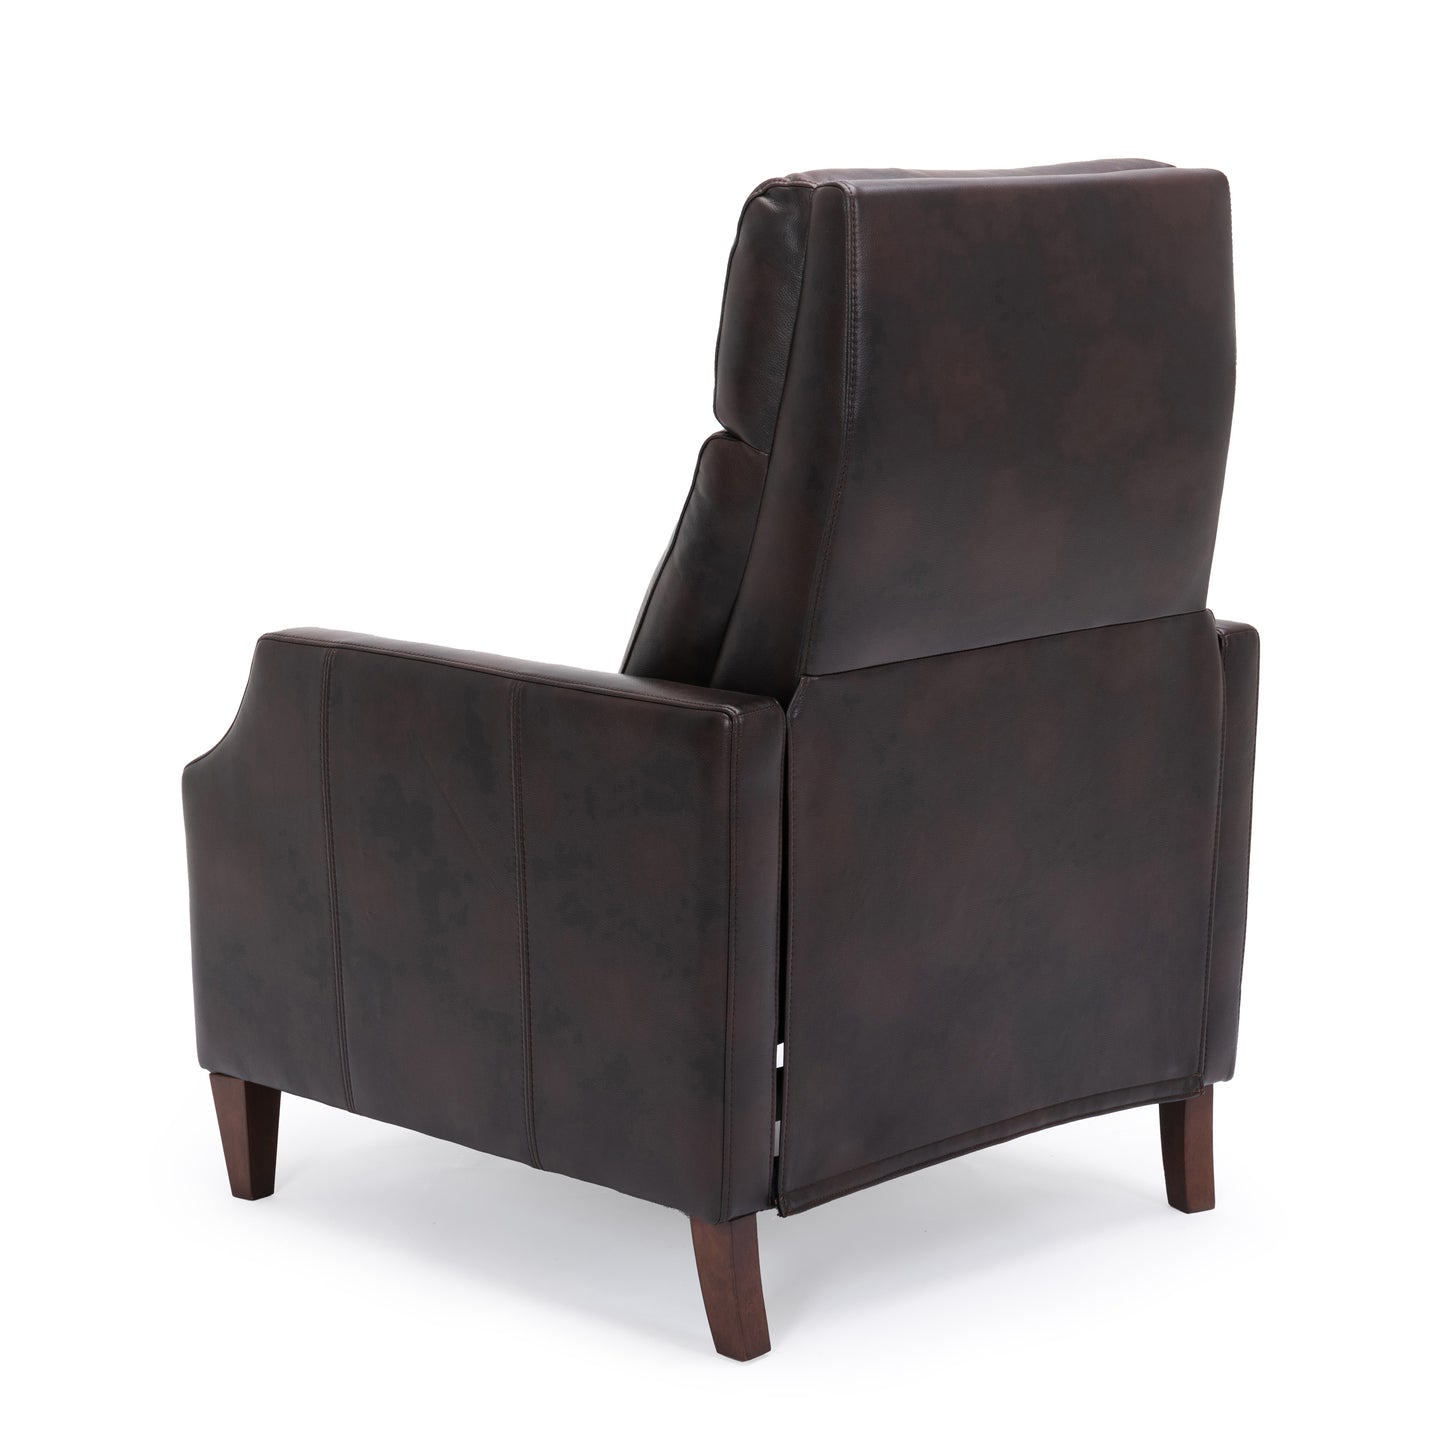 Biscoe Burnished Brown PU Leather Recliner - Stylish and Comfortable relaxer